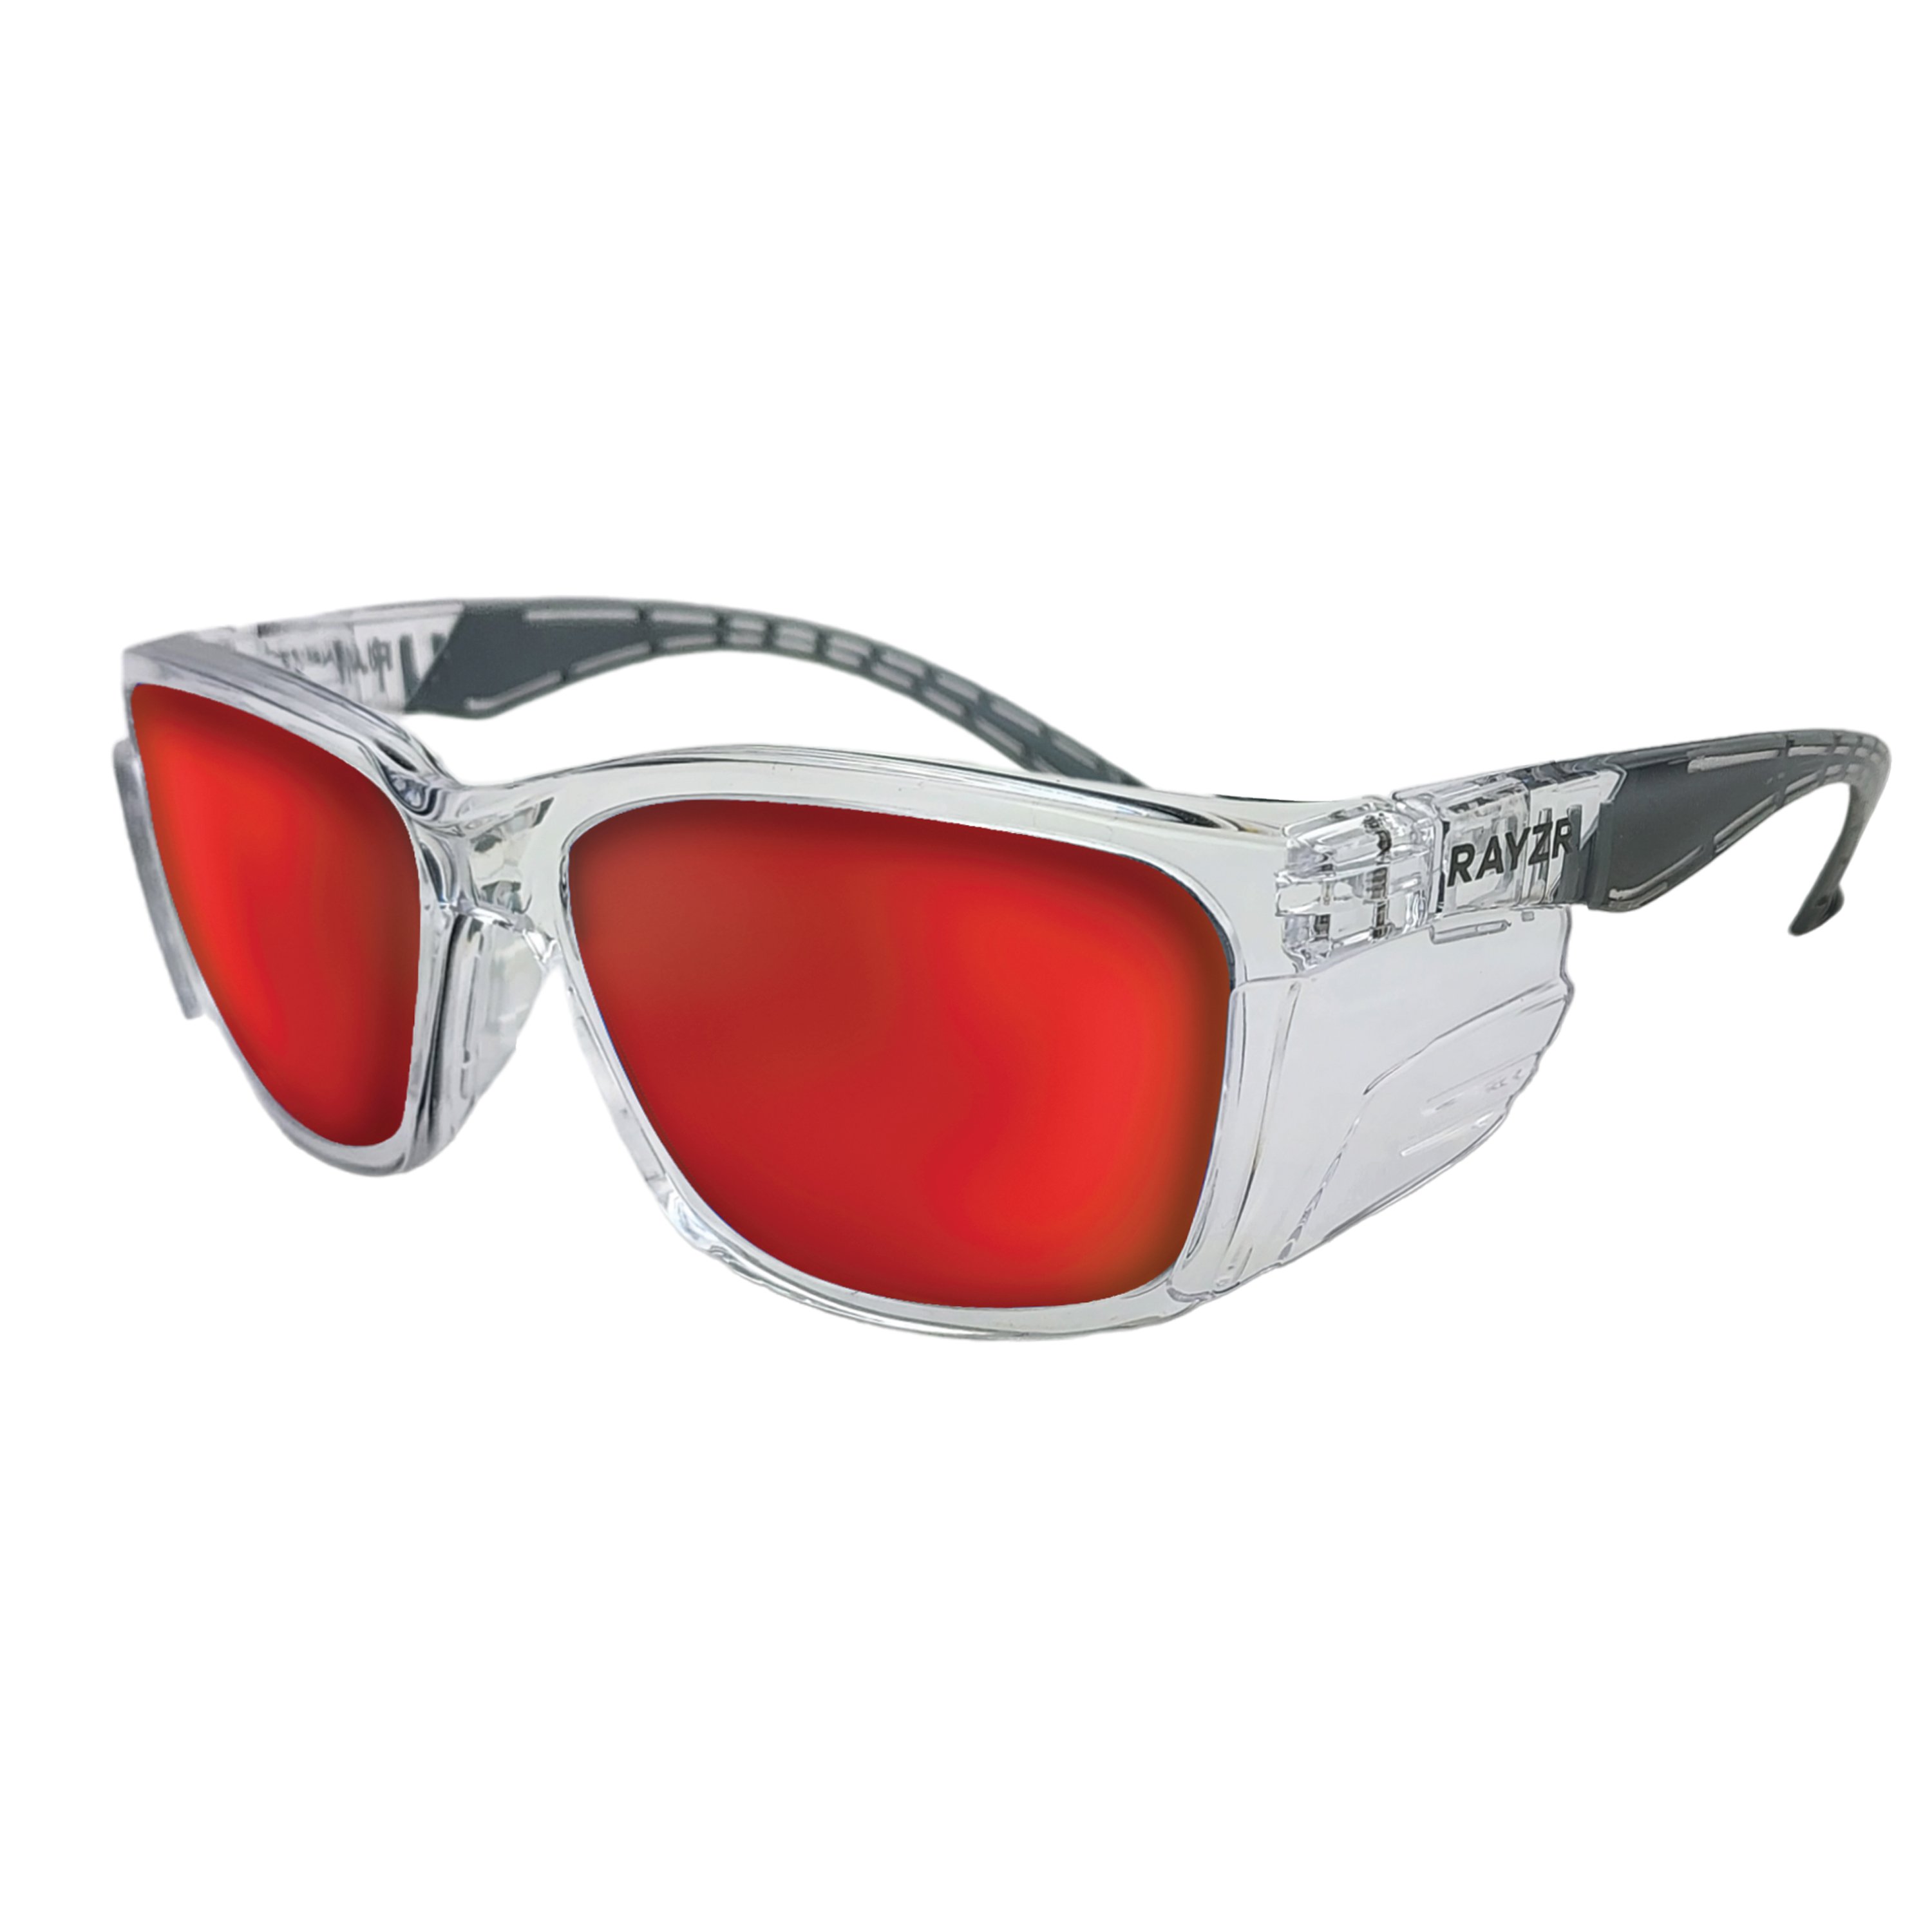 Rayzr Safety Glasses - Clear Frame - Red Mirror Polarised